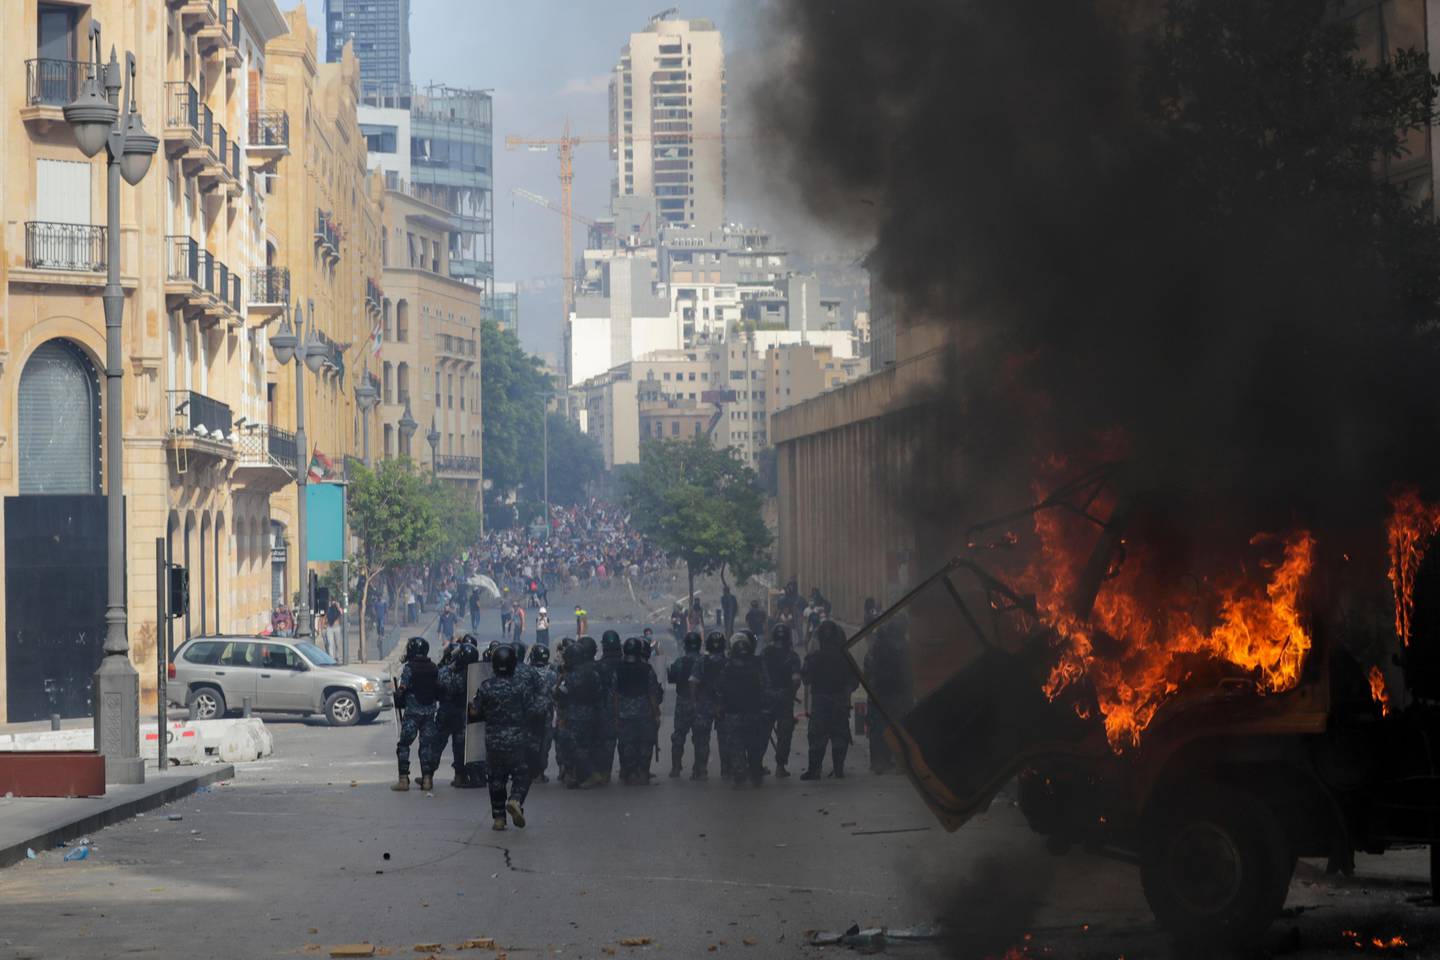 People clash with police during a protest against the political elites and the government after this week's deadly explosion at Beirut port which devastated large parts of the capital and killed more than 150 people, in Beirut, Lebanon, Saturday, Aug. 8, 2020. (AP Photo/Hassan Ammar)